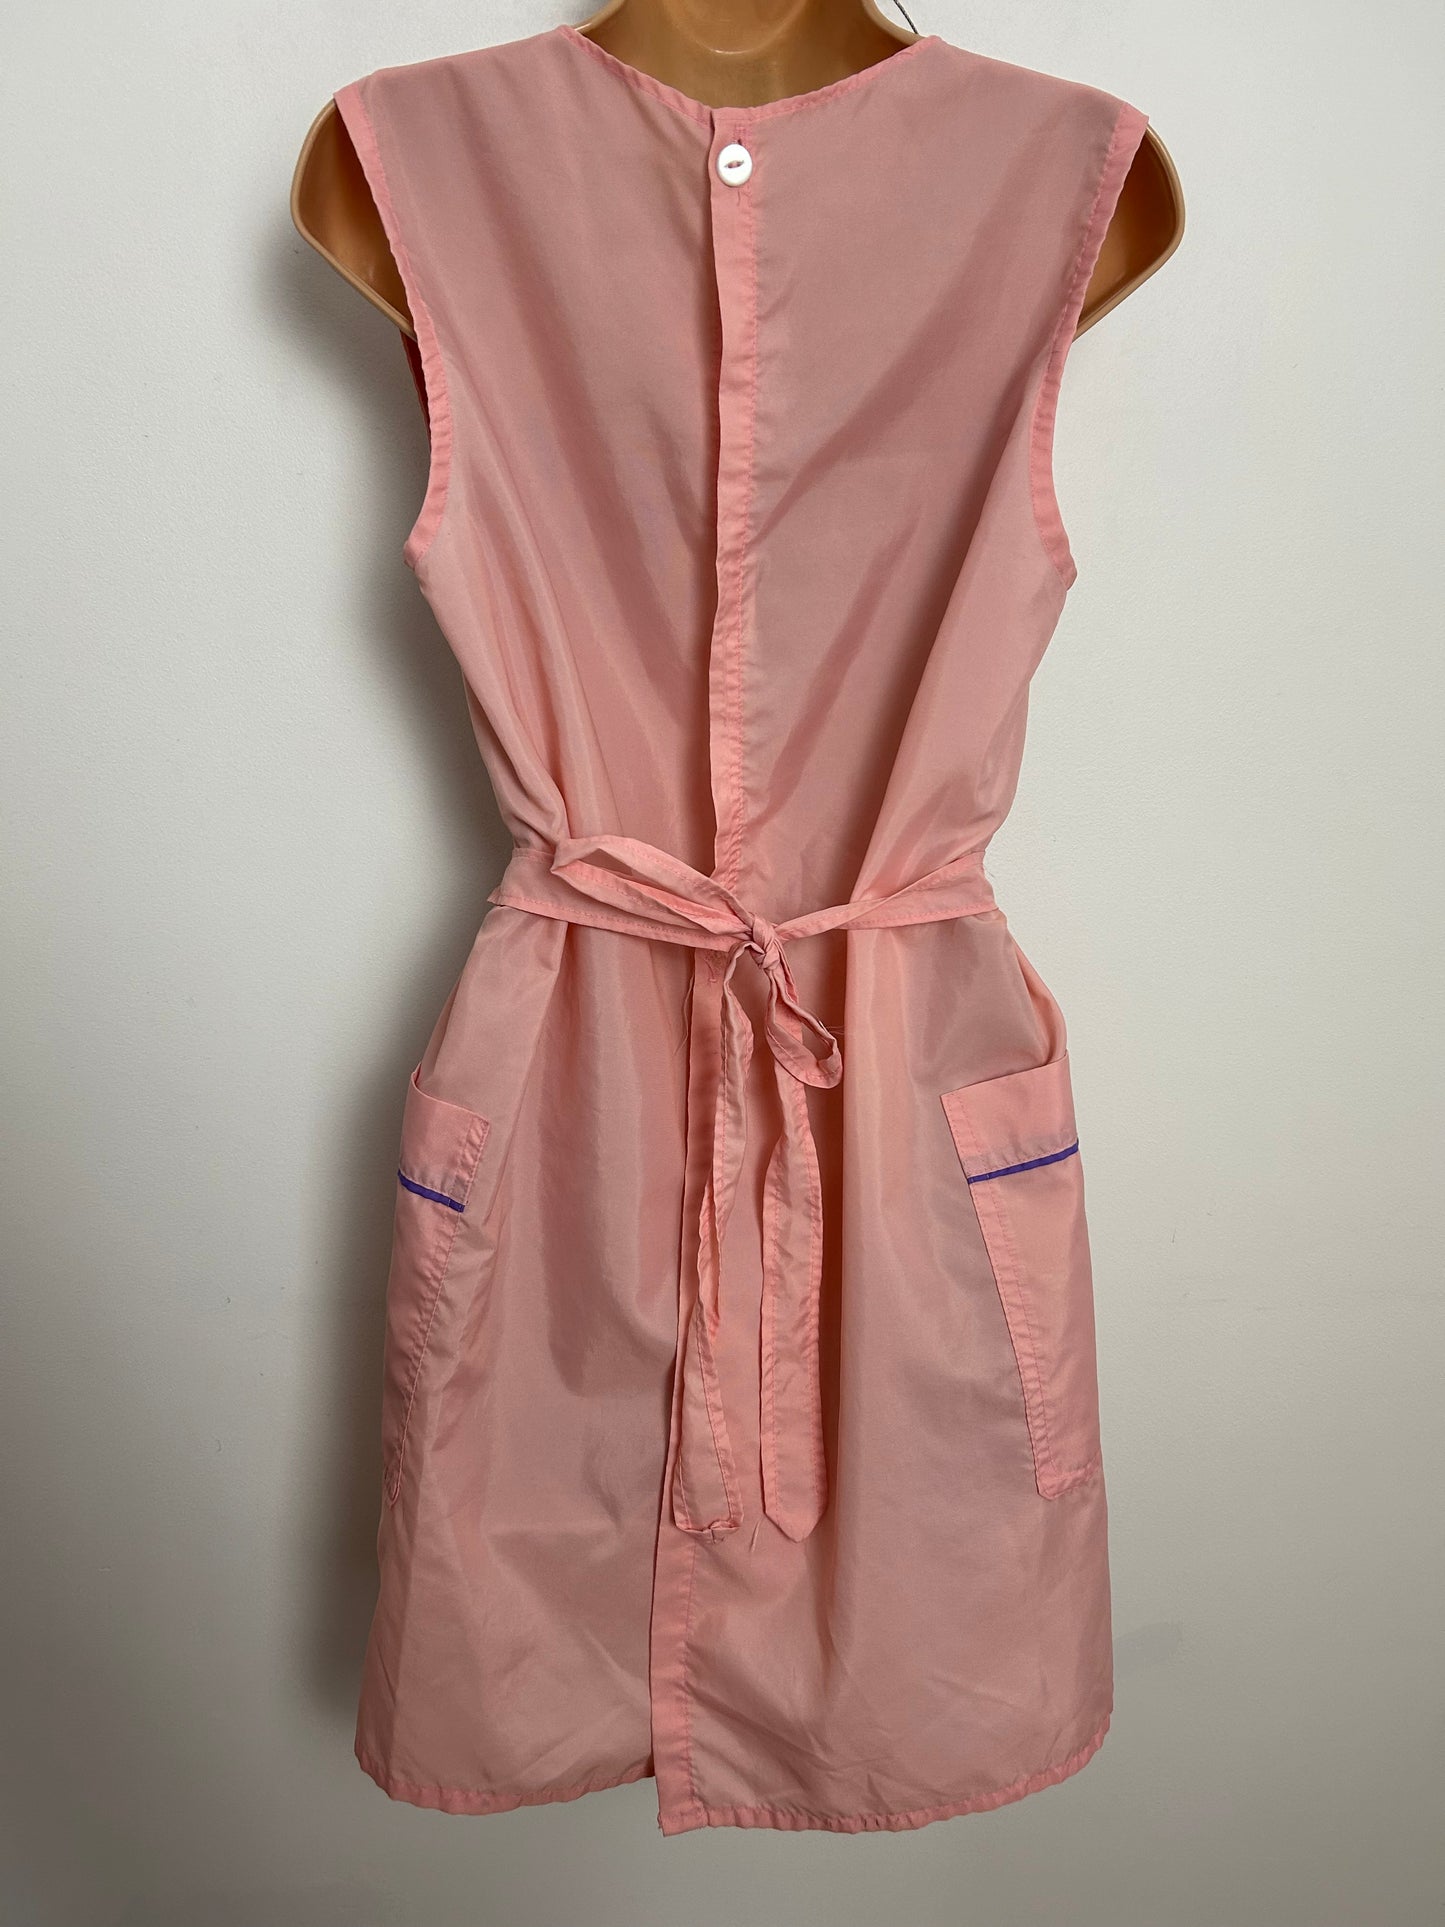 Vintage 1960s Up To Size 12 Pink Pocket Detail Housewife Tie Back House Coat Style Apron